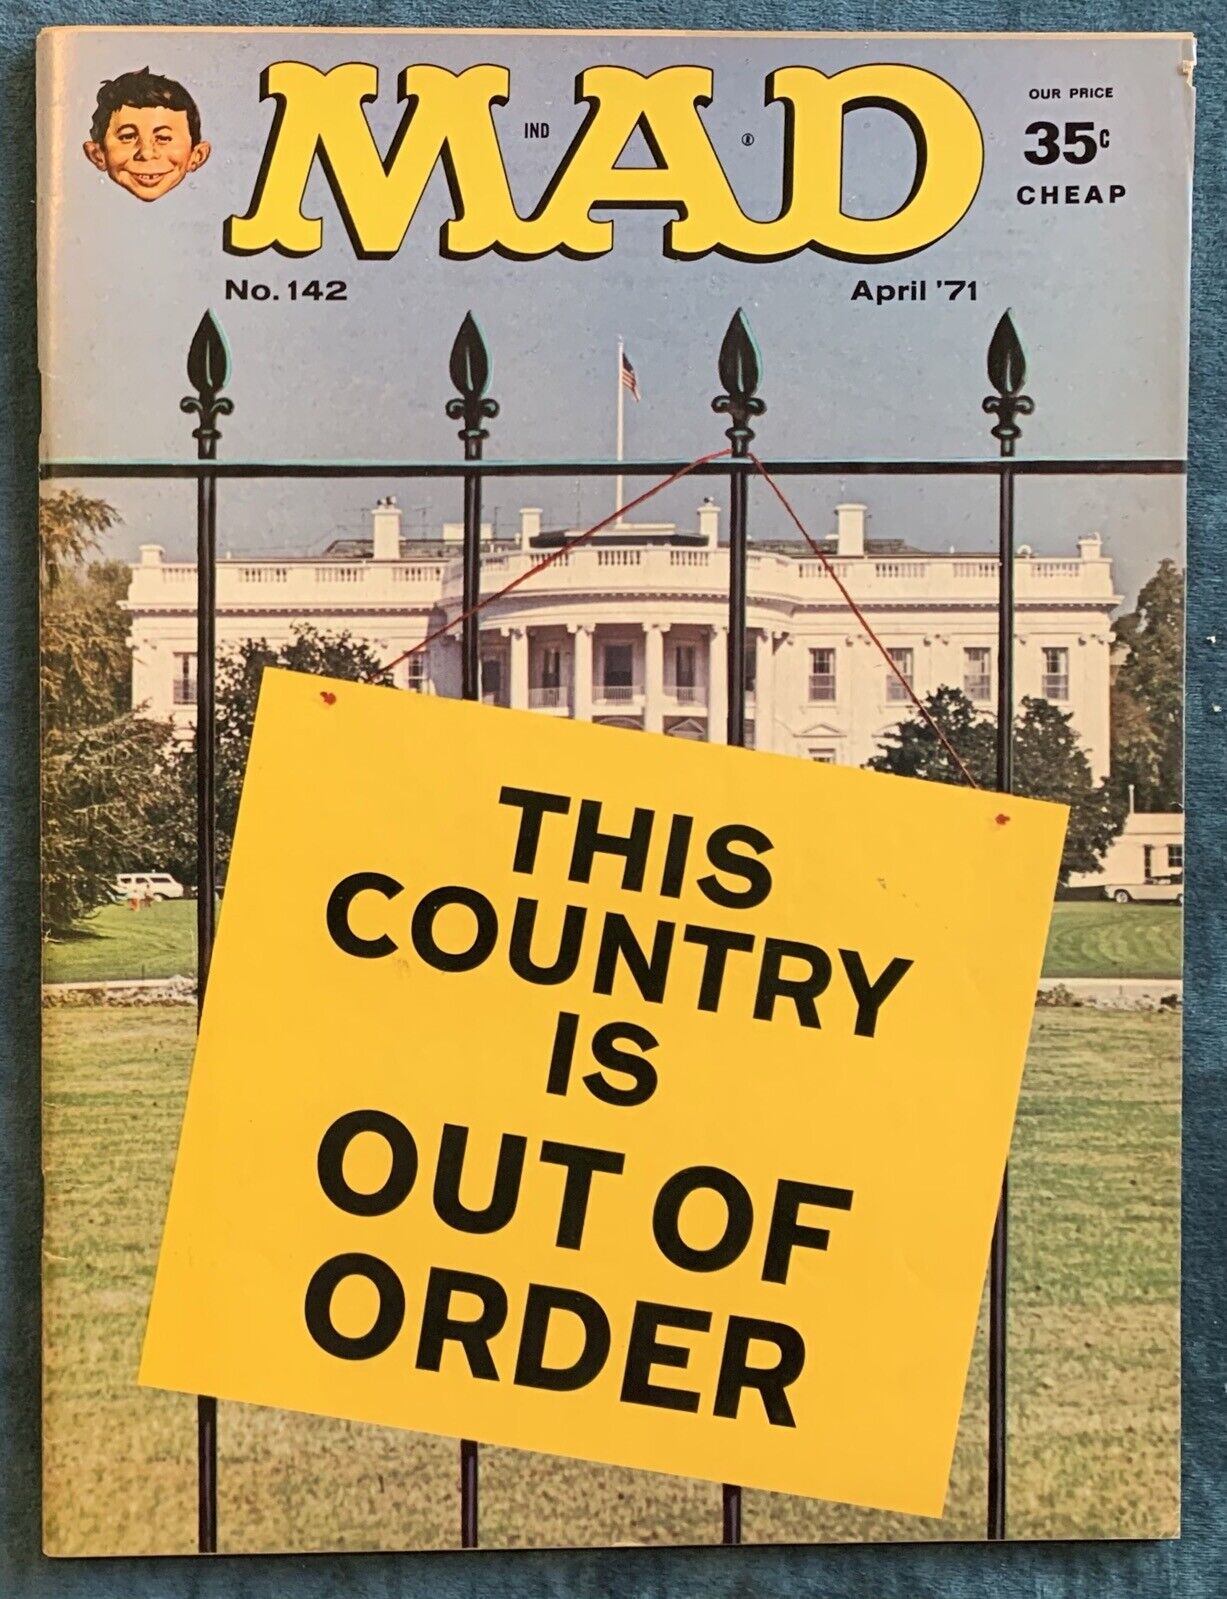 Mad Magazine #142  April 1971  This Country Is Out Of Order